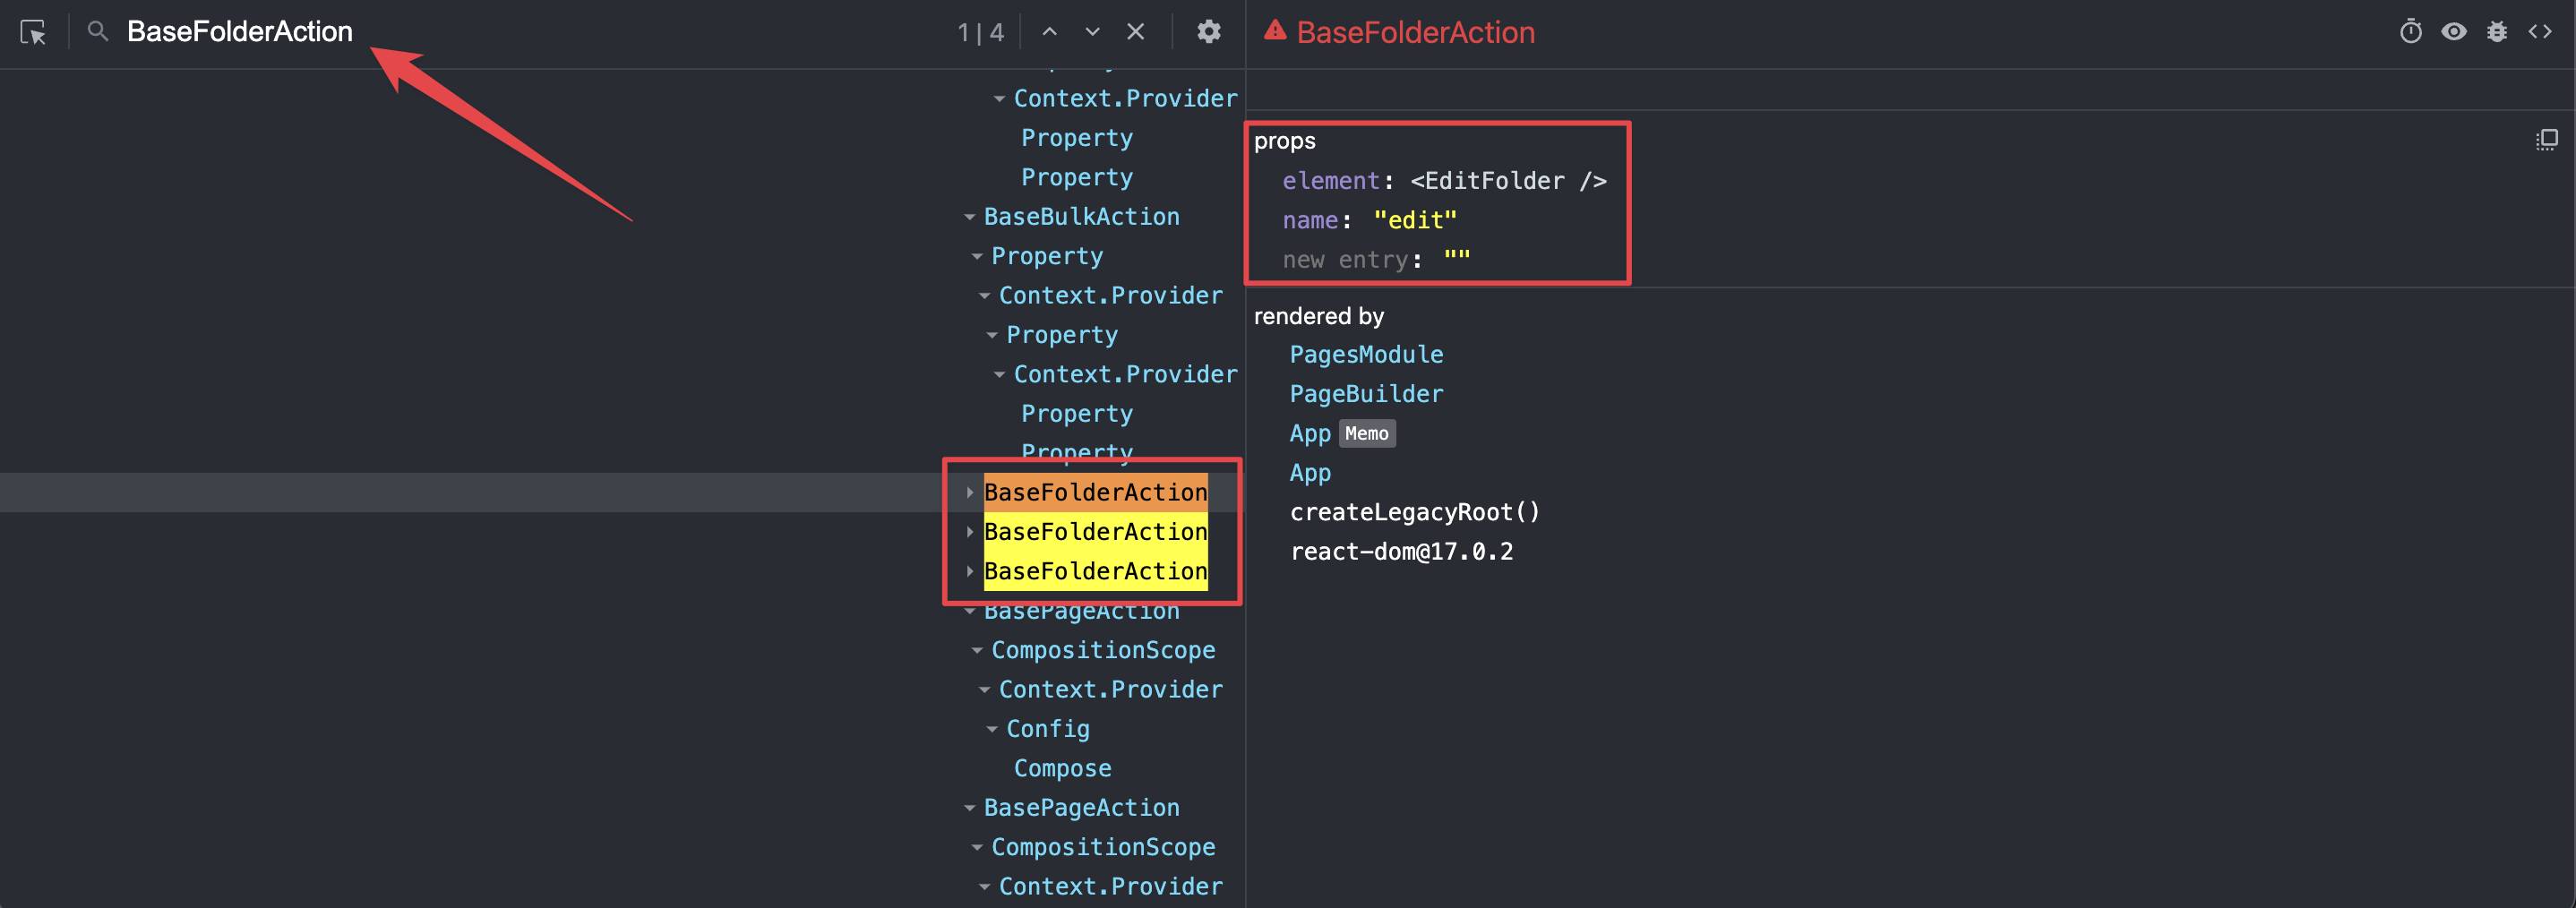 Discover Existing Folder Actions